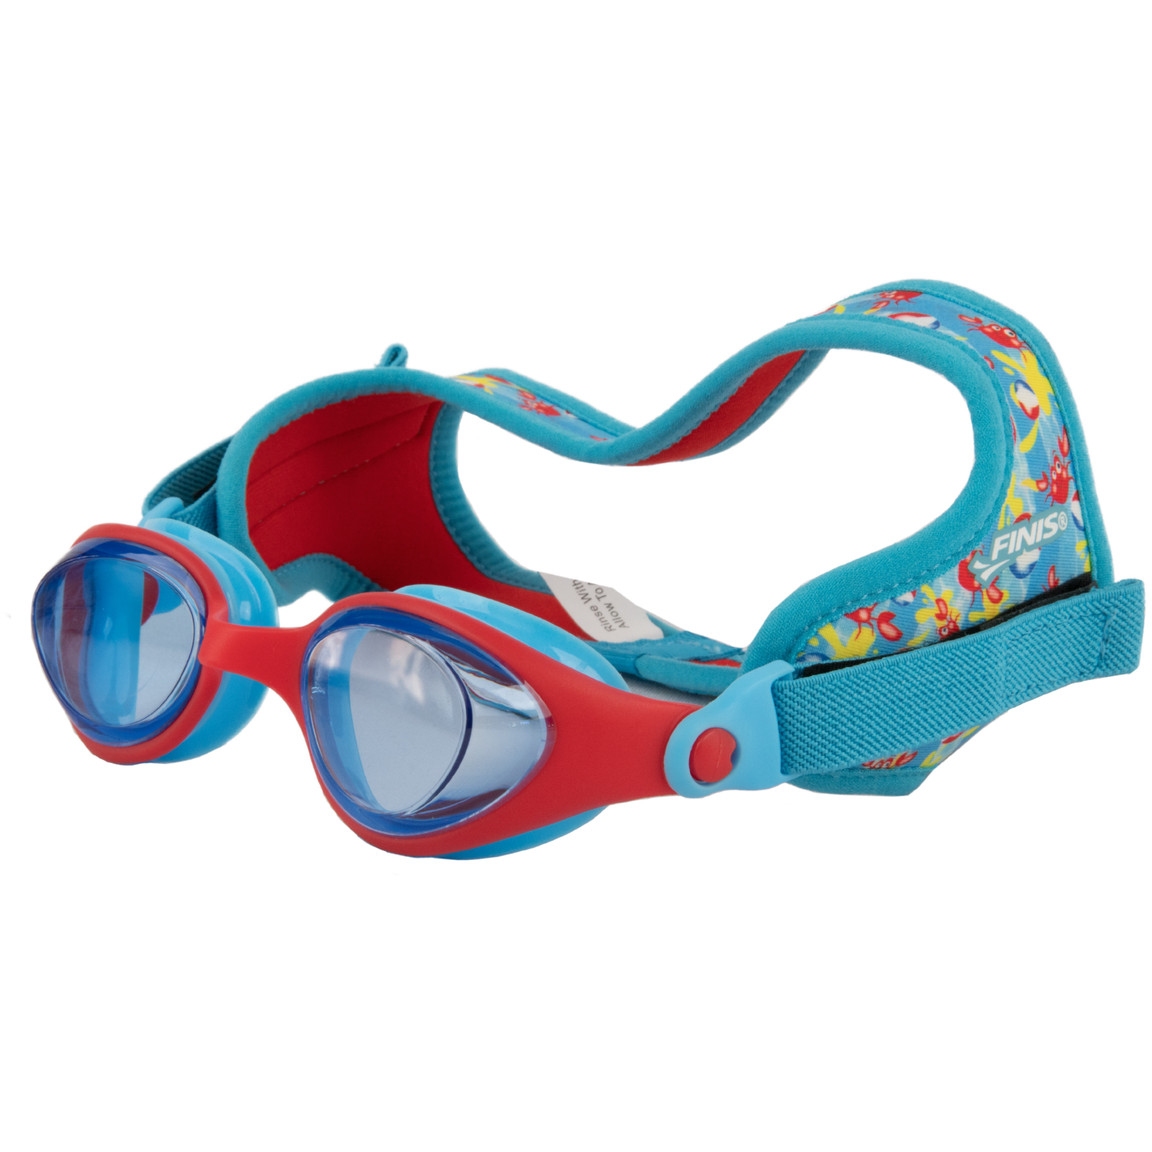 Picture of FINIS, Inc. DragonFlys Kids&#039; Goggles - crab tint